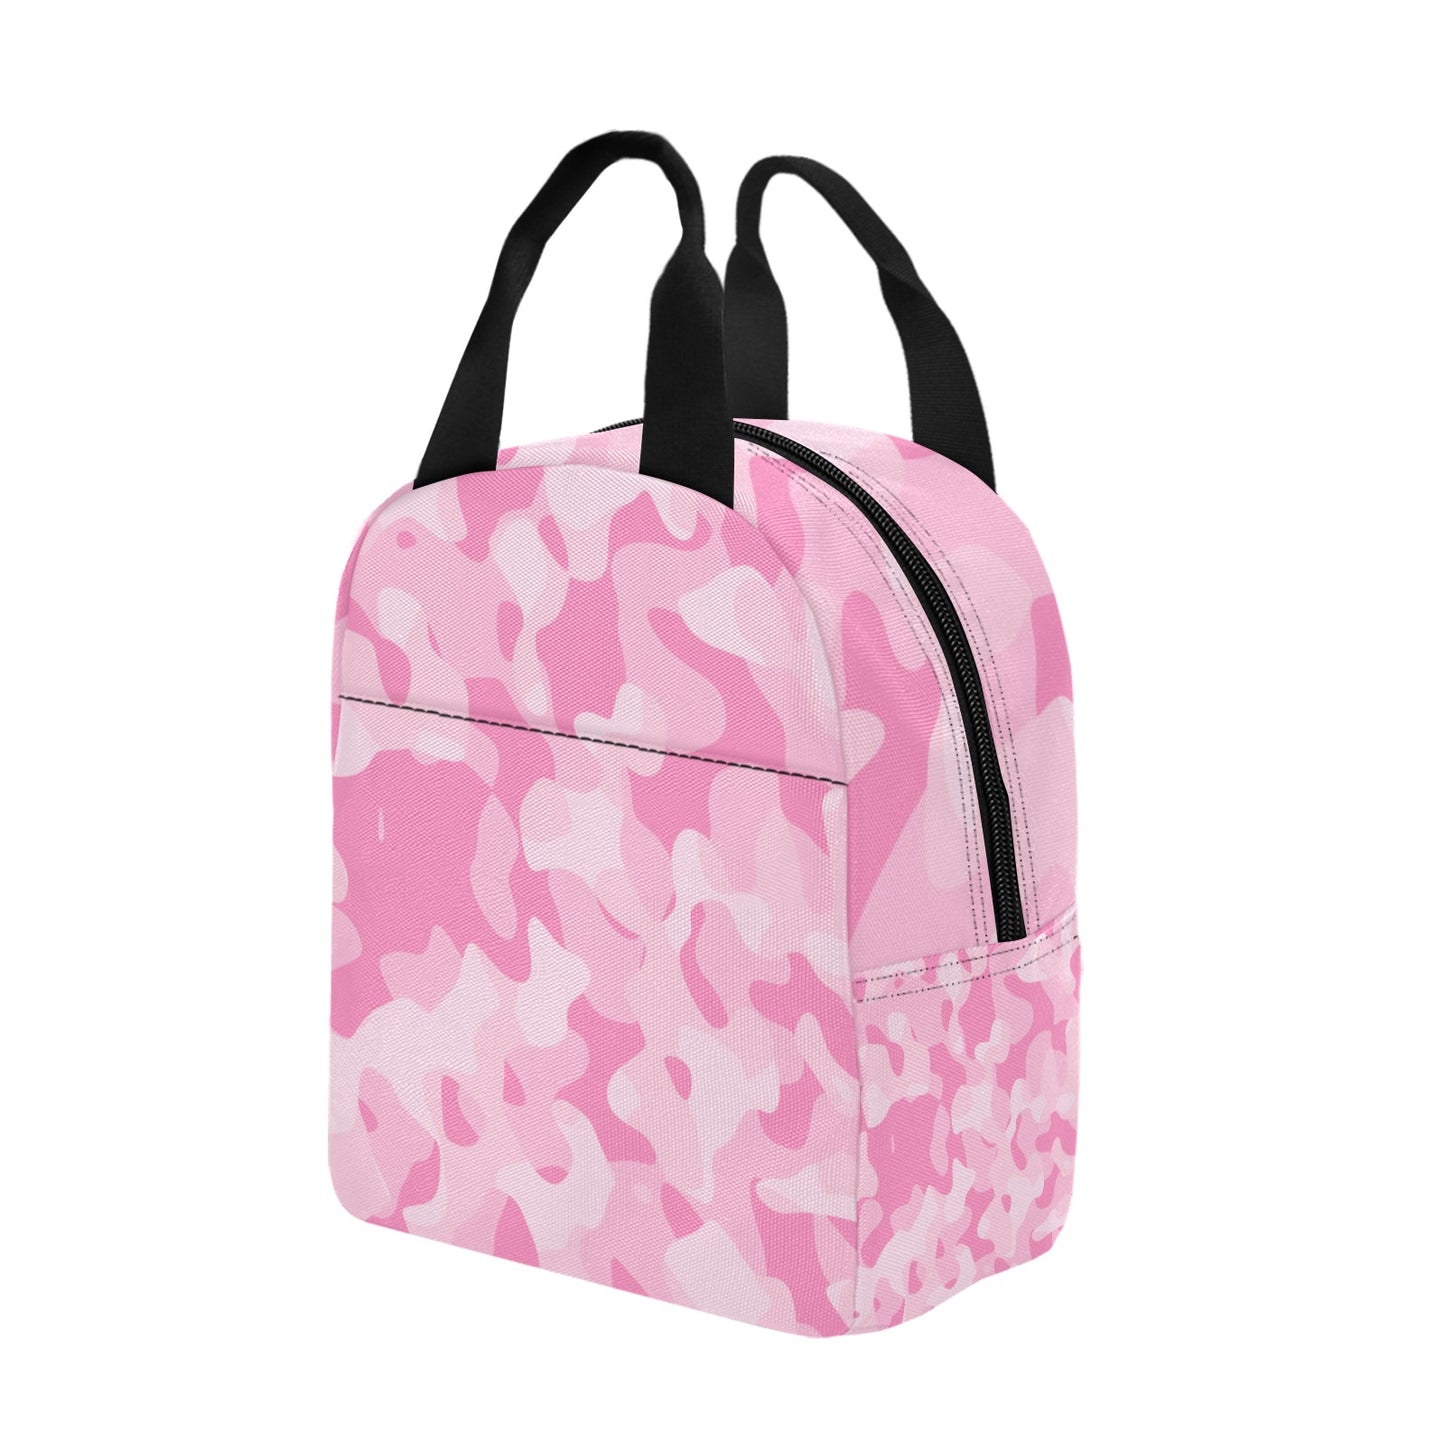 Insulated Zipper Lunch Bag-Pink Camouflage